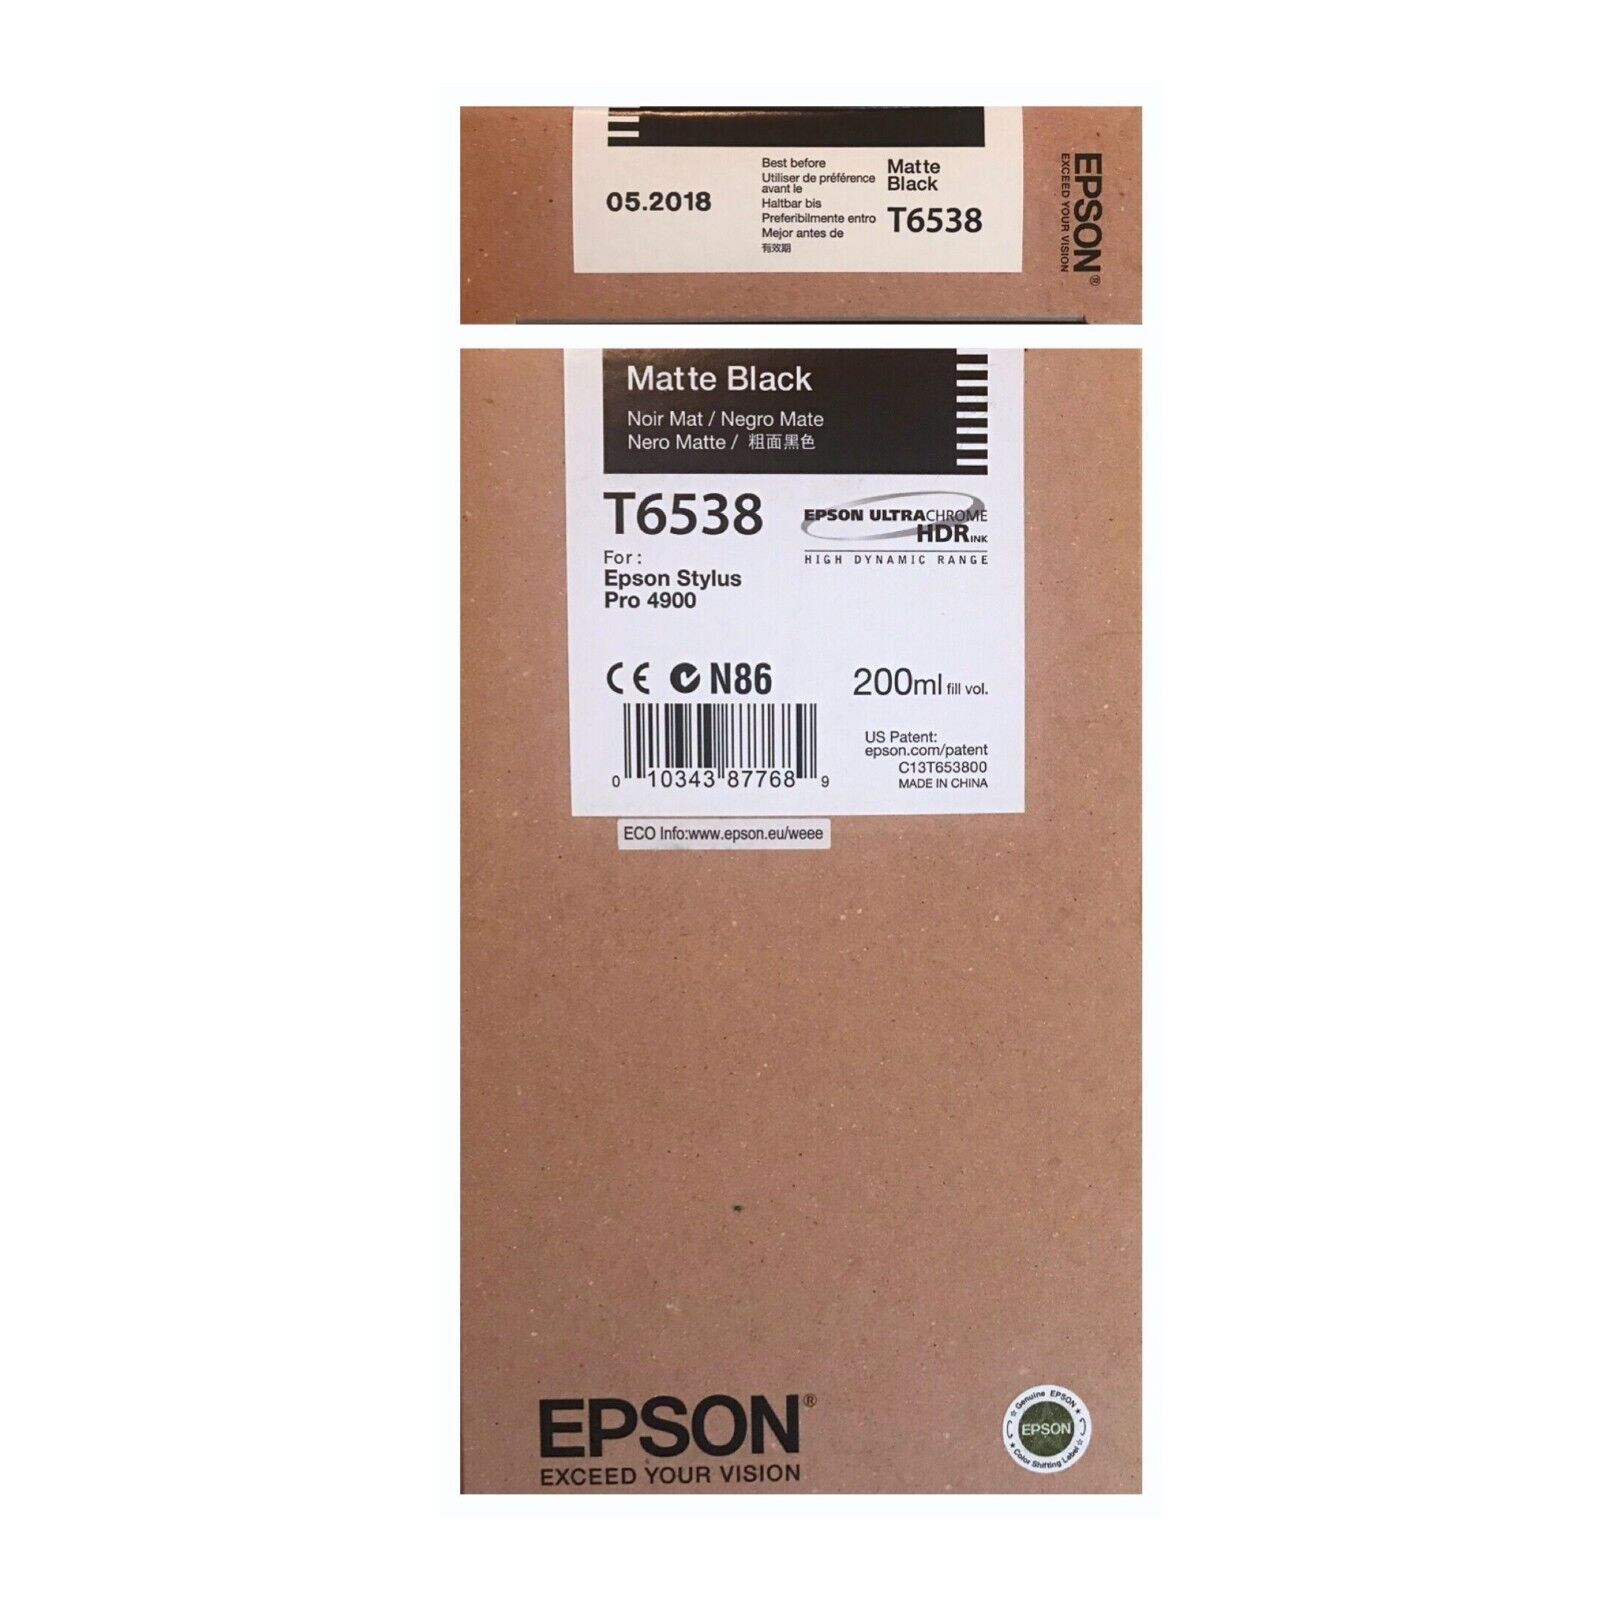 Epson Matte Black T6538 New Unopened Box Great Condition